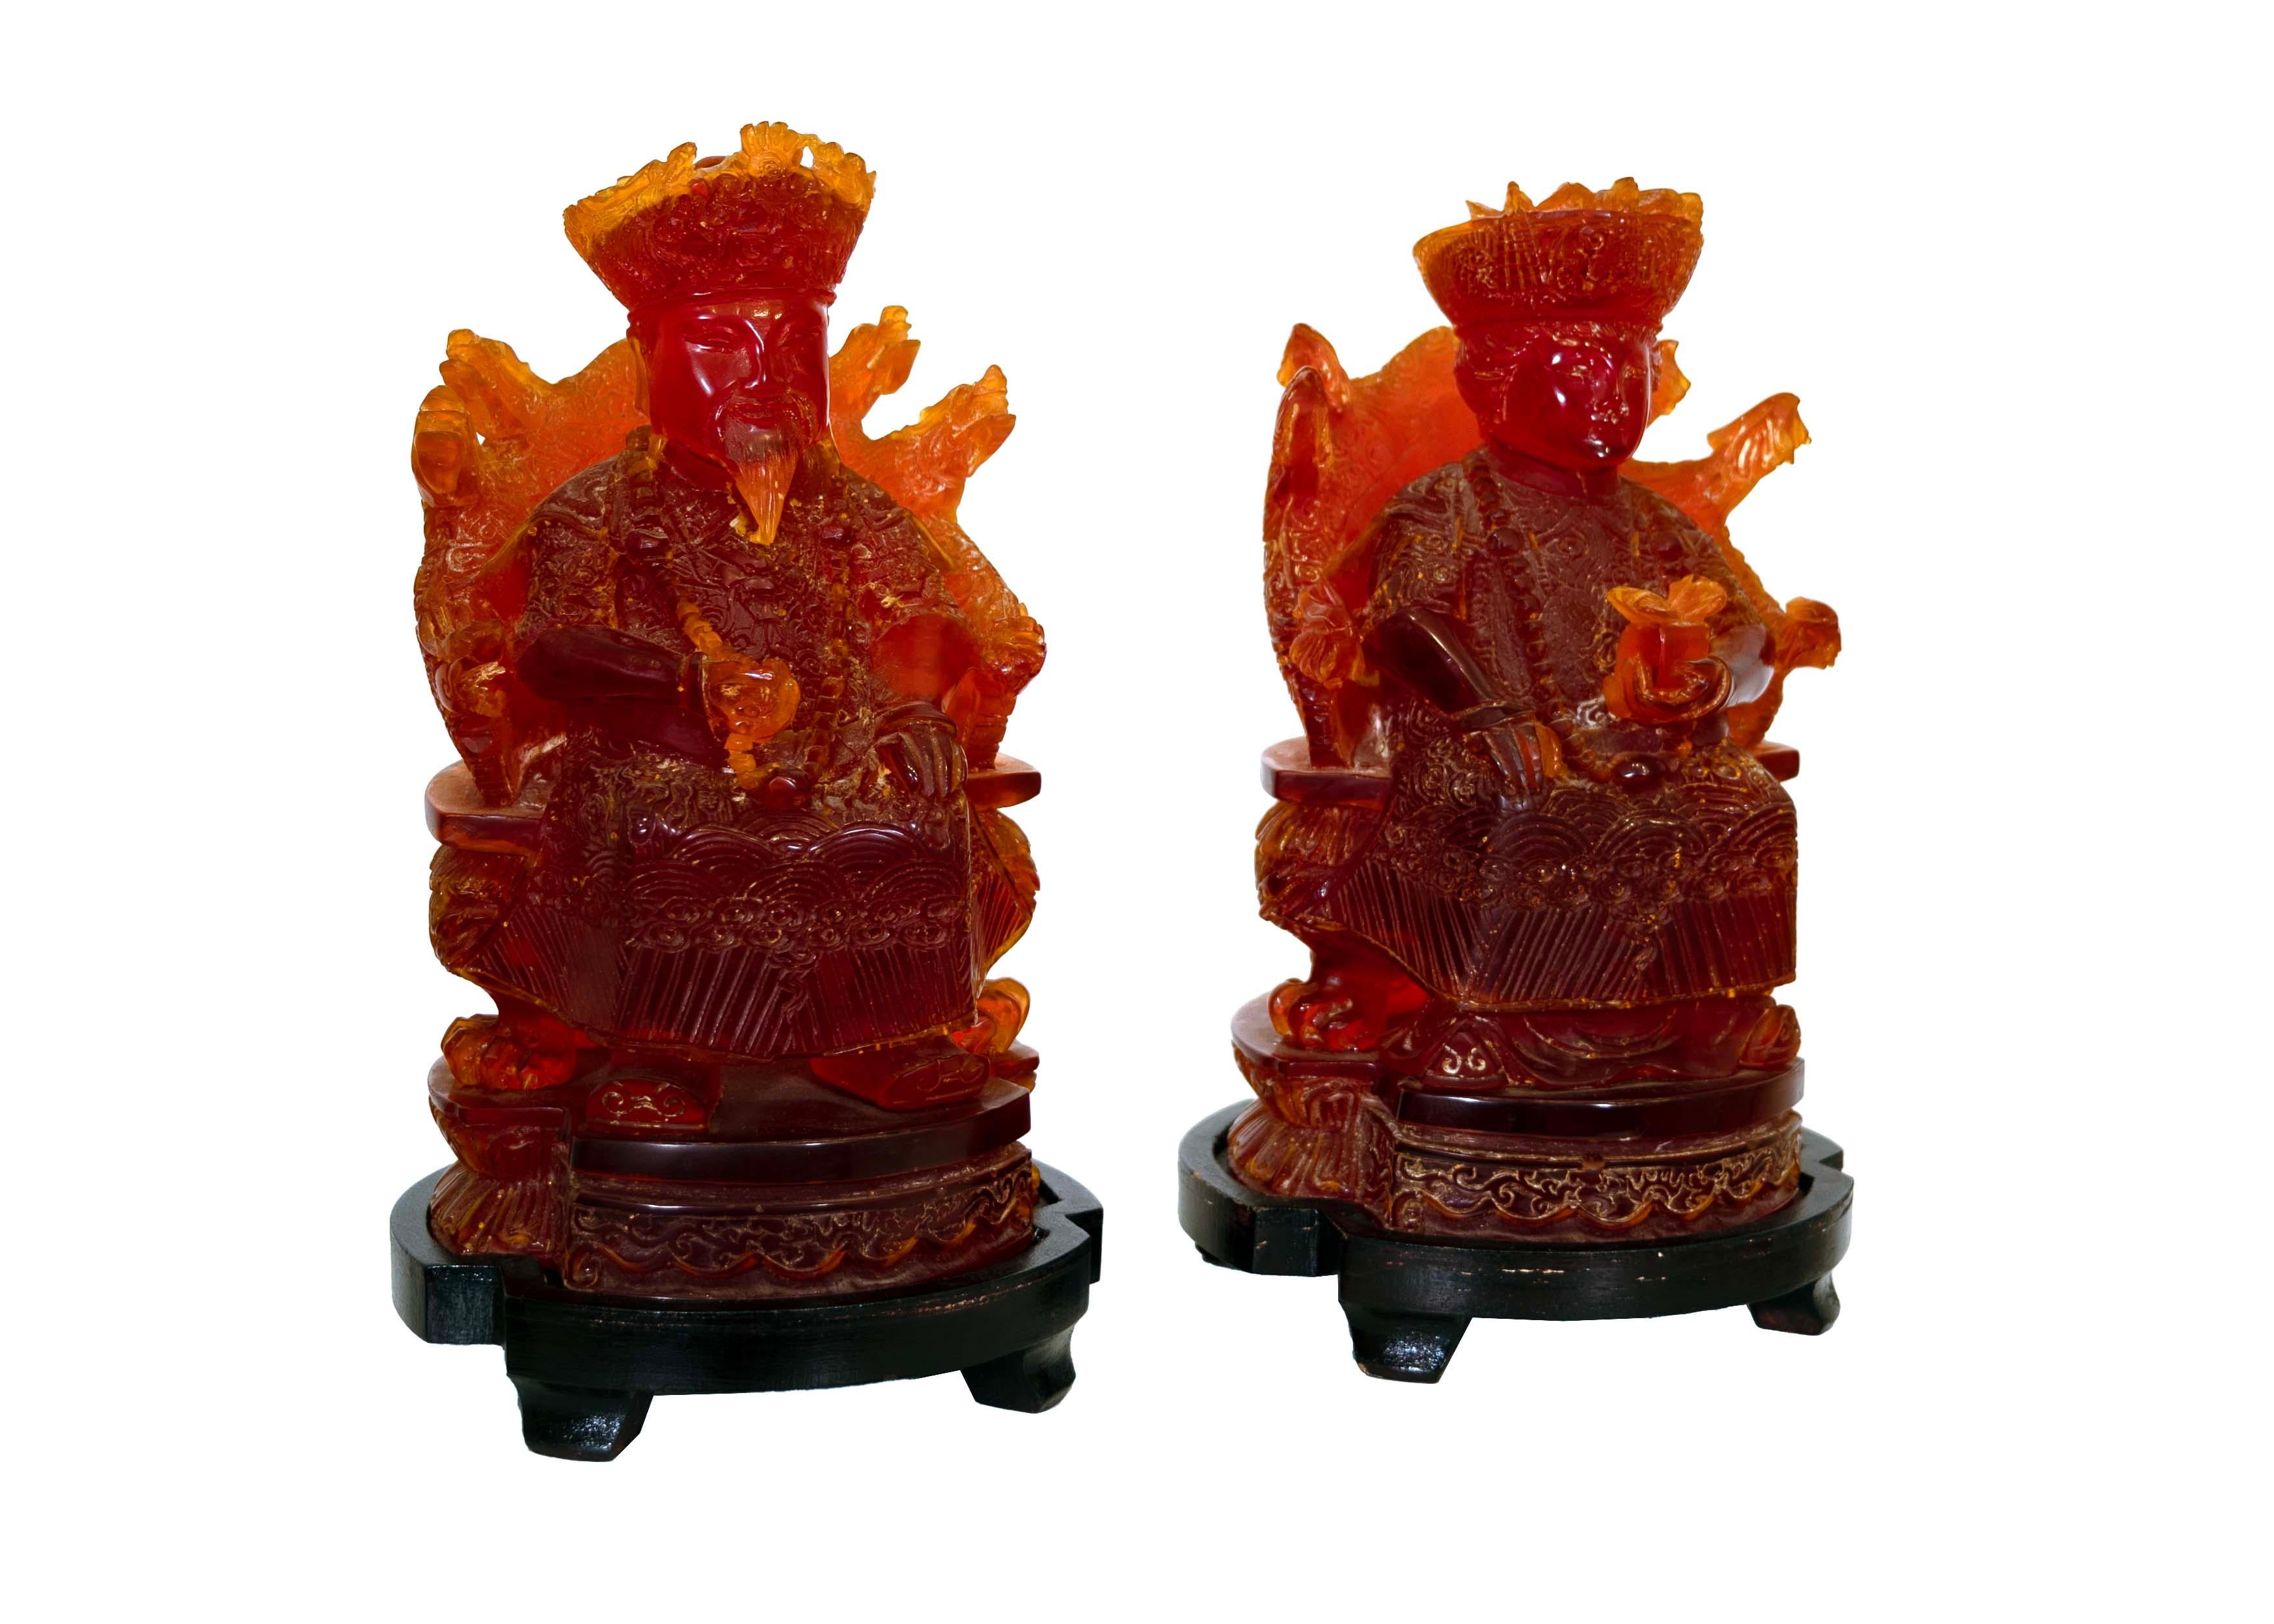 Immerse yourself in the grandeur of imperial China with this captivating pair of seated figures, masterfully crafted in cherry resin. Adorned with intricate carvings that showcase the opulent attire and regal bearing of an emperor and his consort,